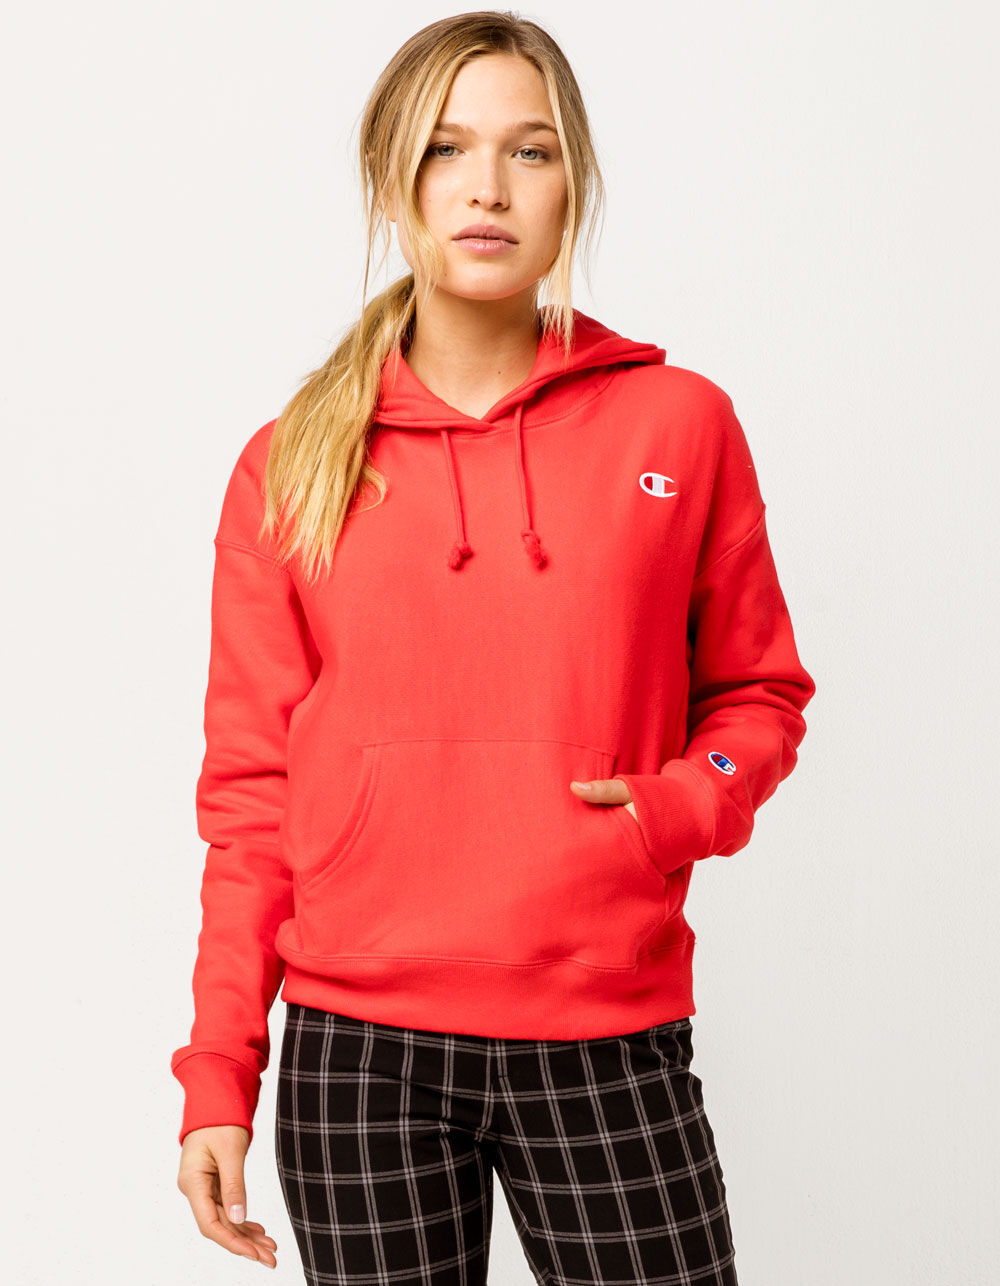 CHAMPION Reverse Weave Red Sparks Womens Hoodie - RED SPARKS | Tillys